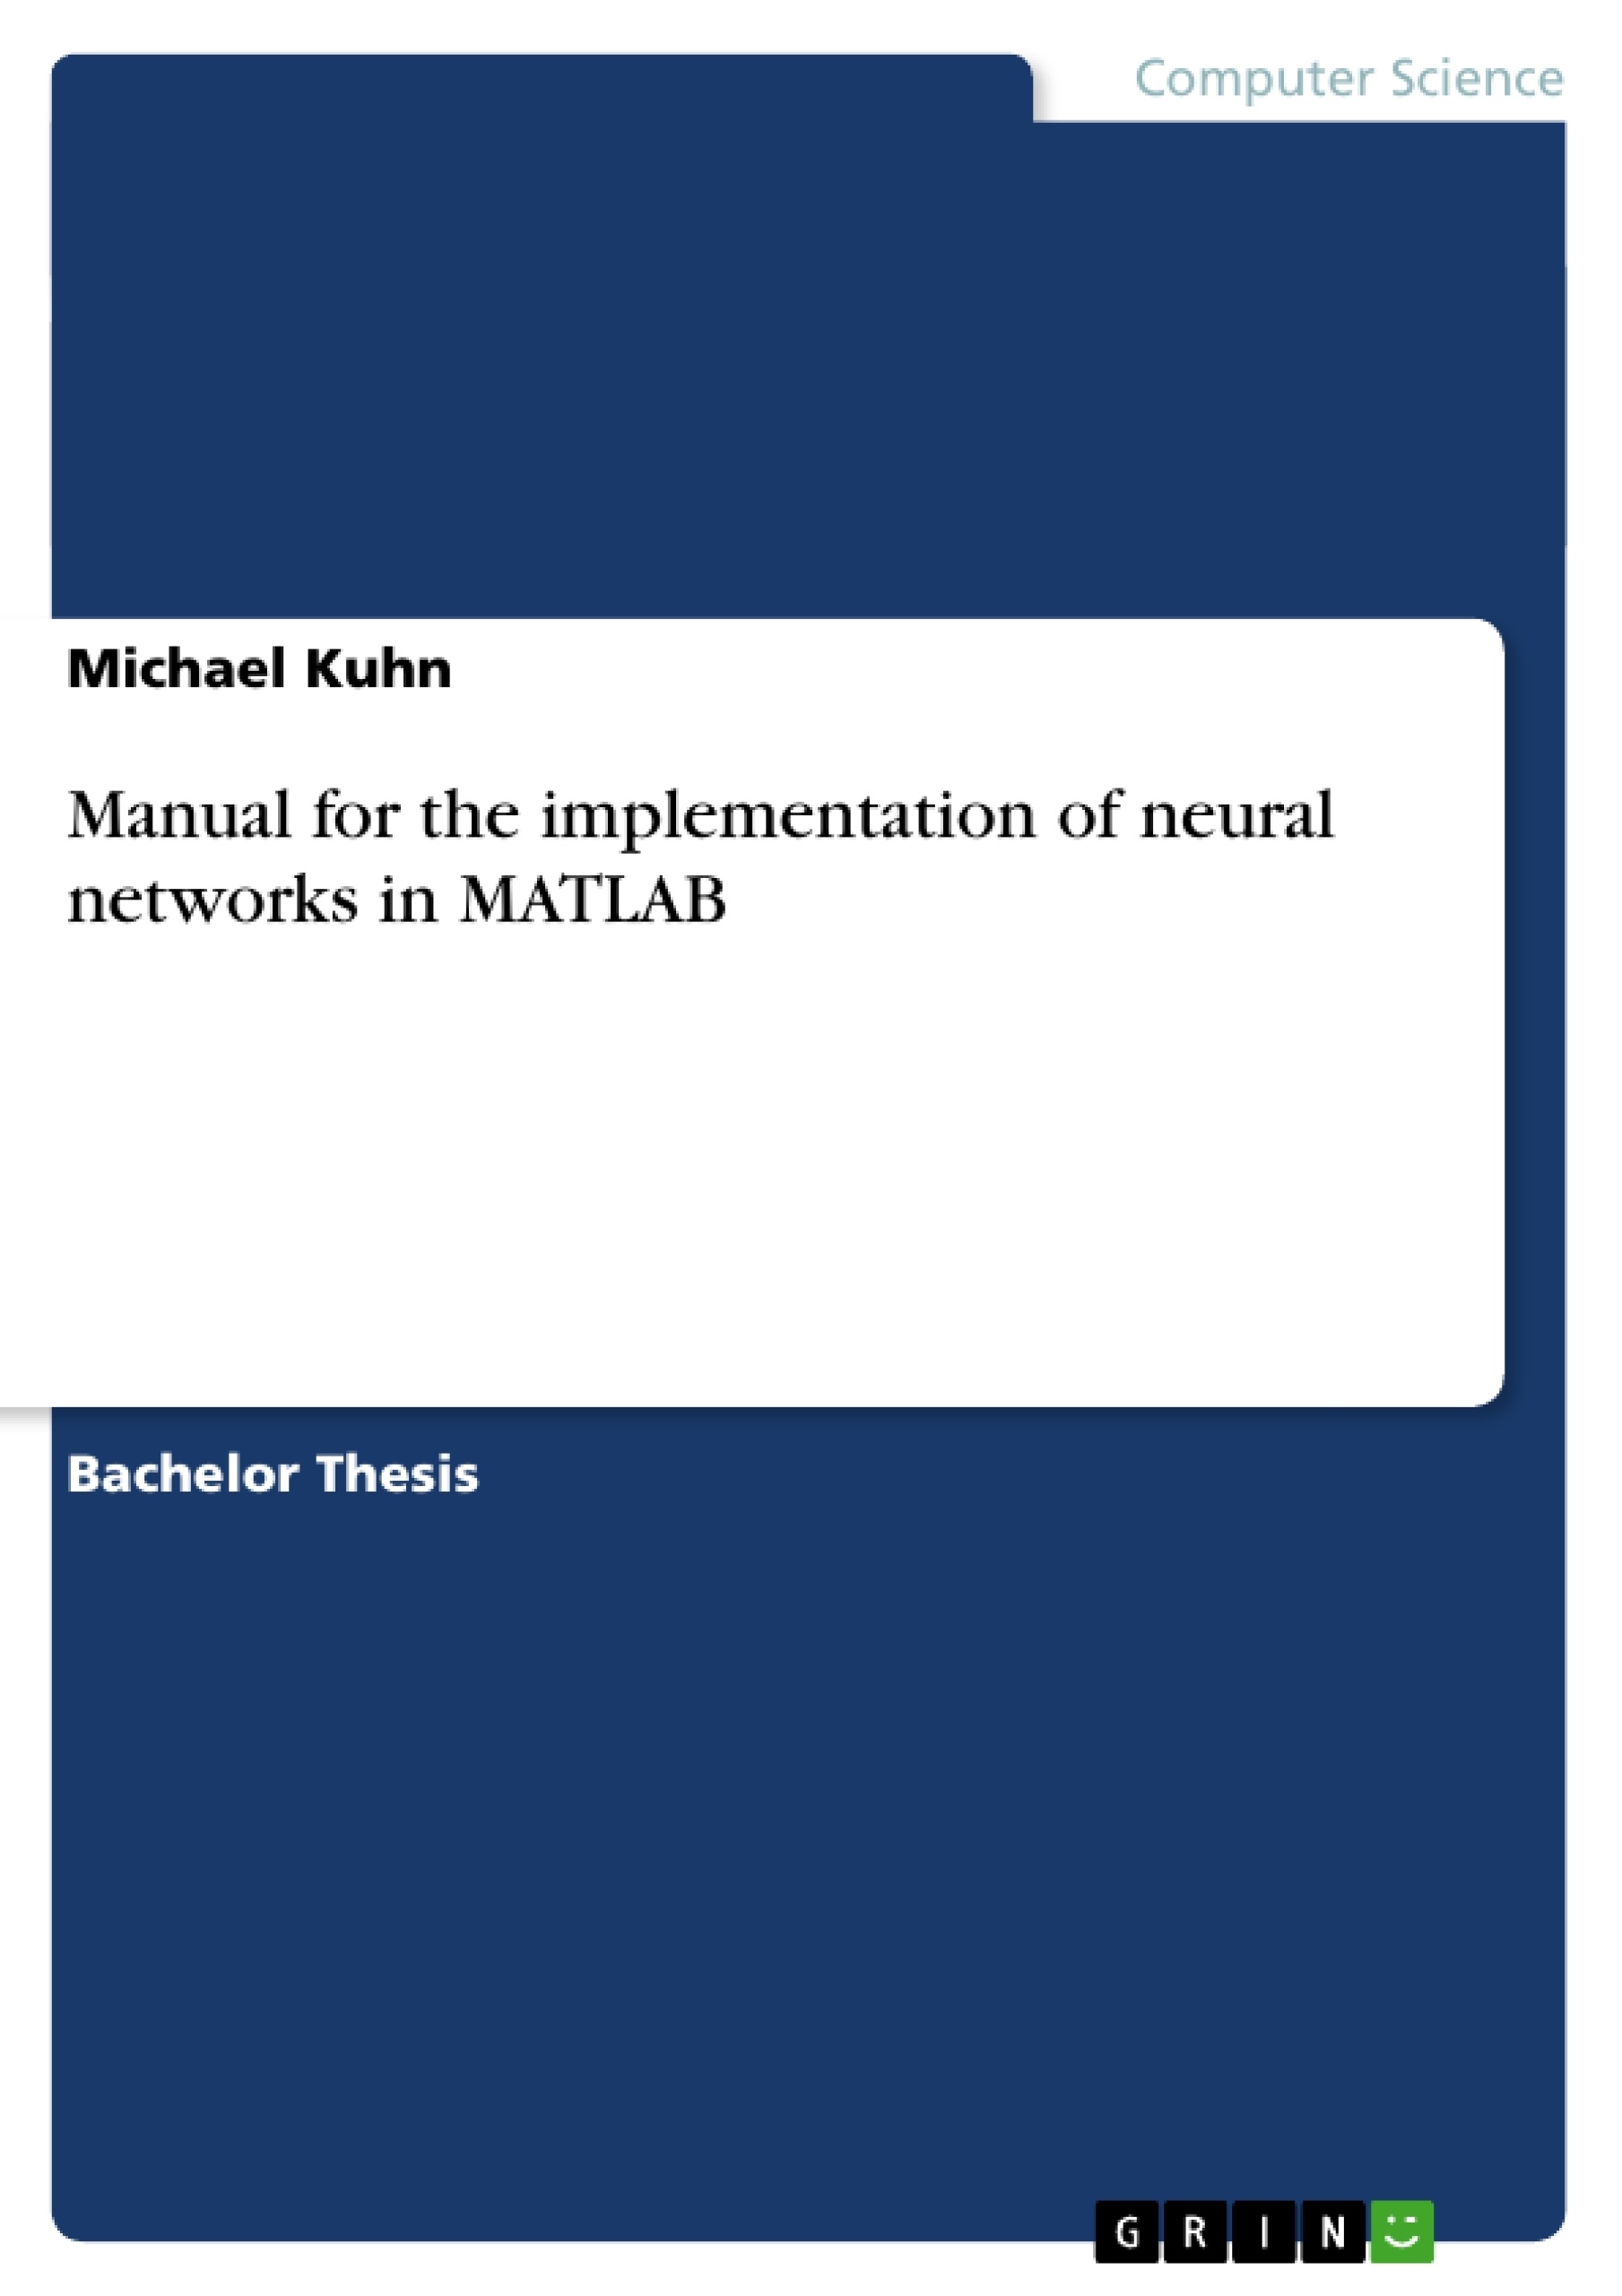 Title: Manual for the implementation of neural networks in MATLAB